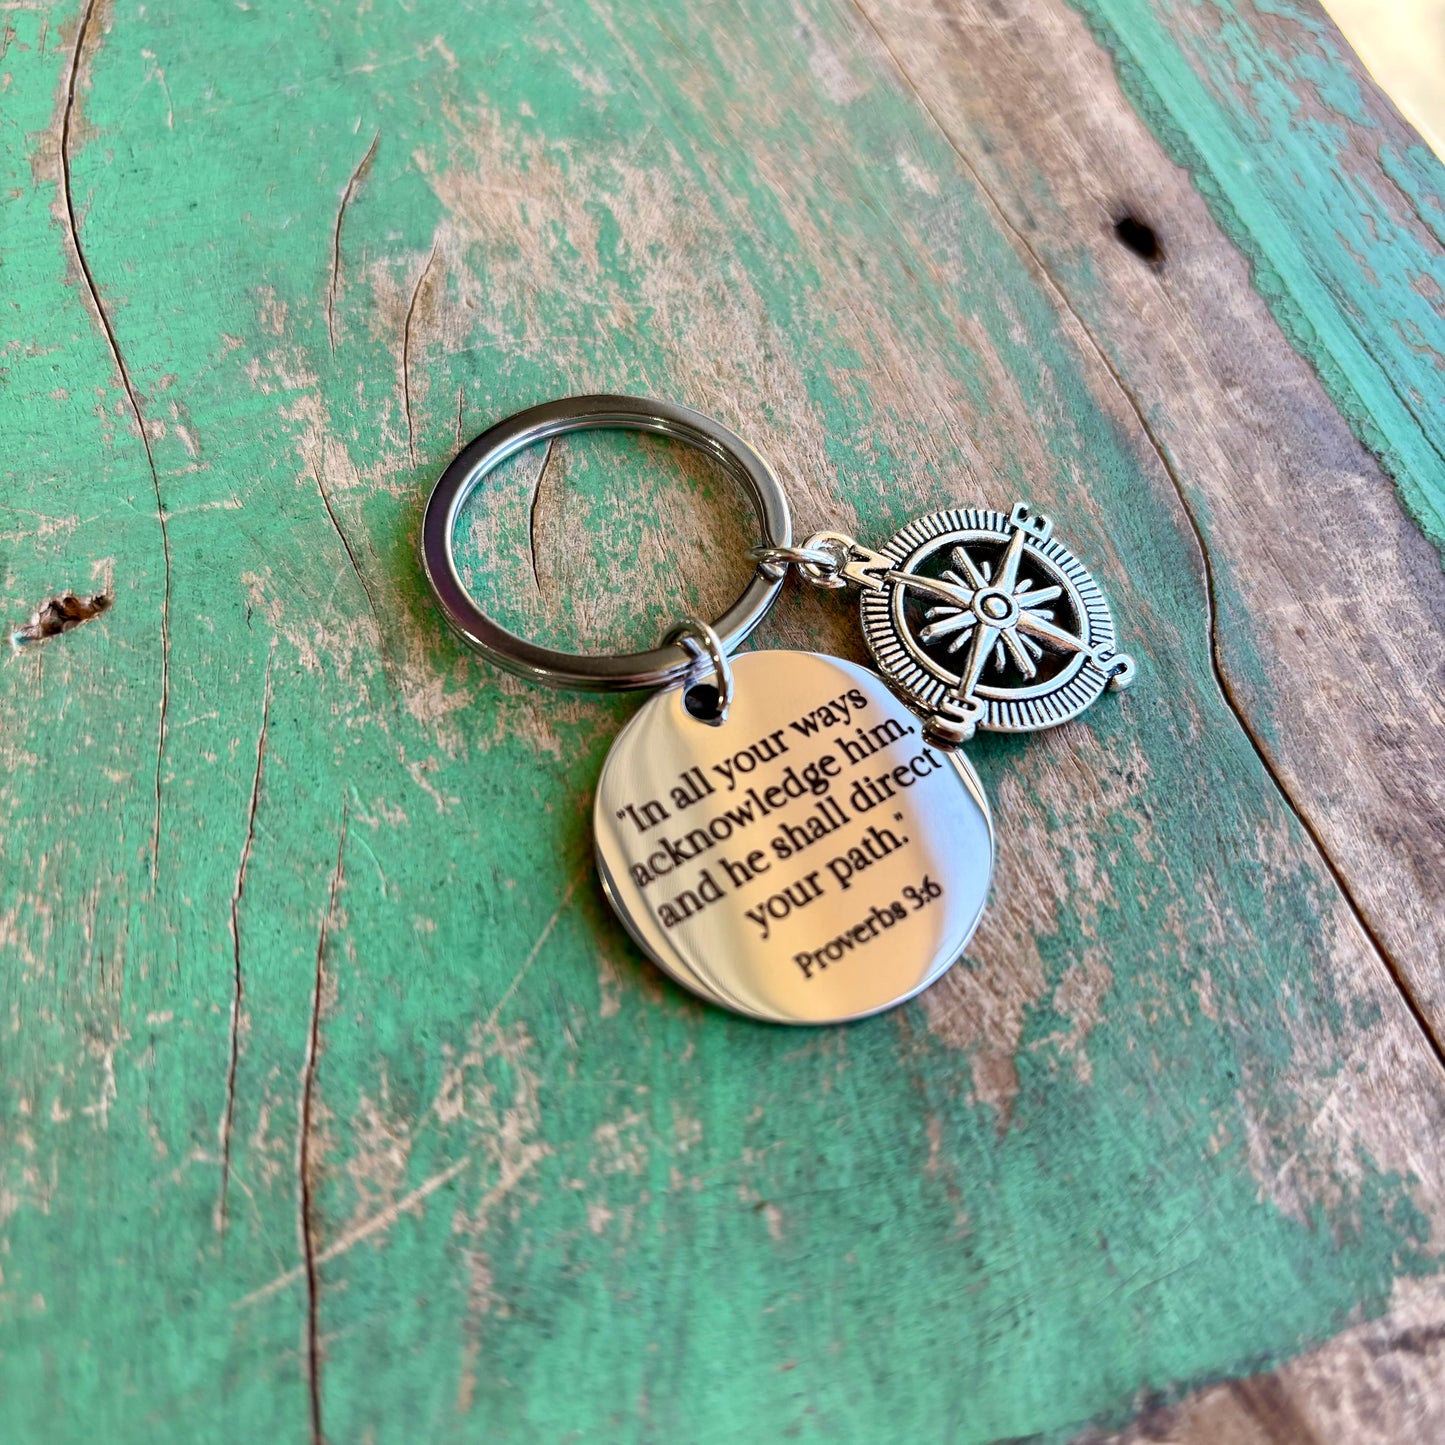 Confirmation Compass Key Chain with Prayer Card